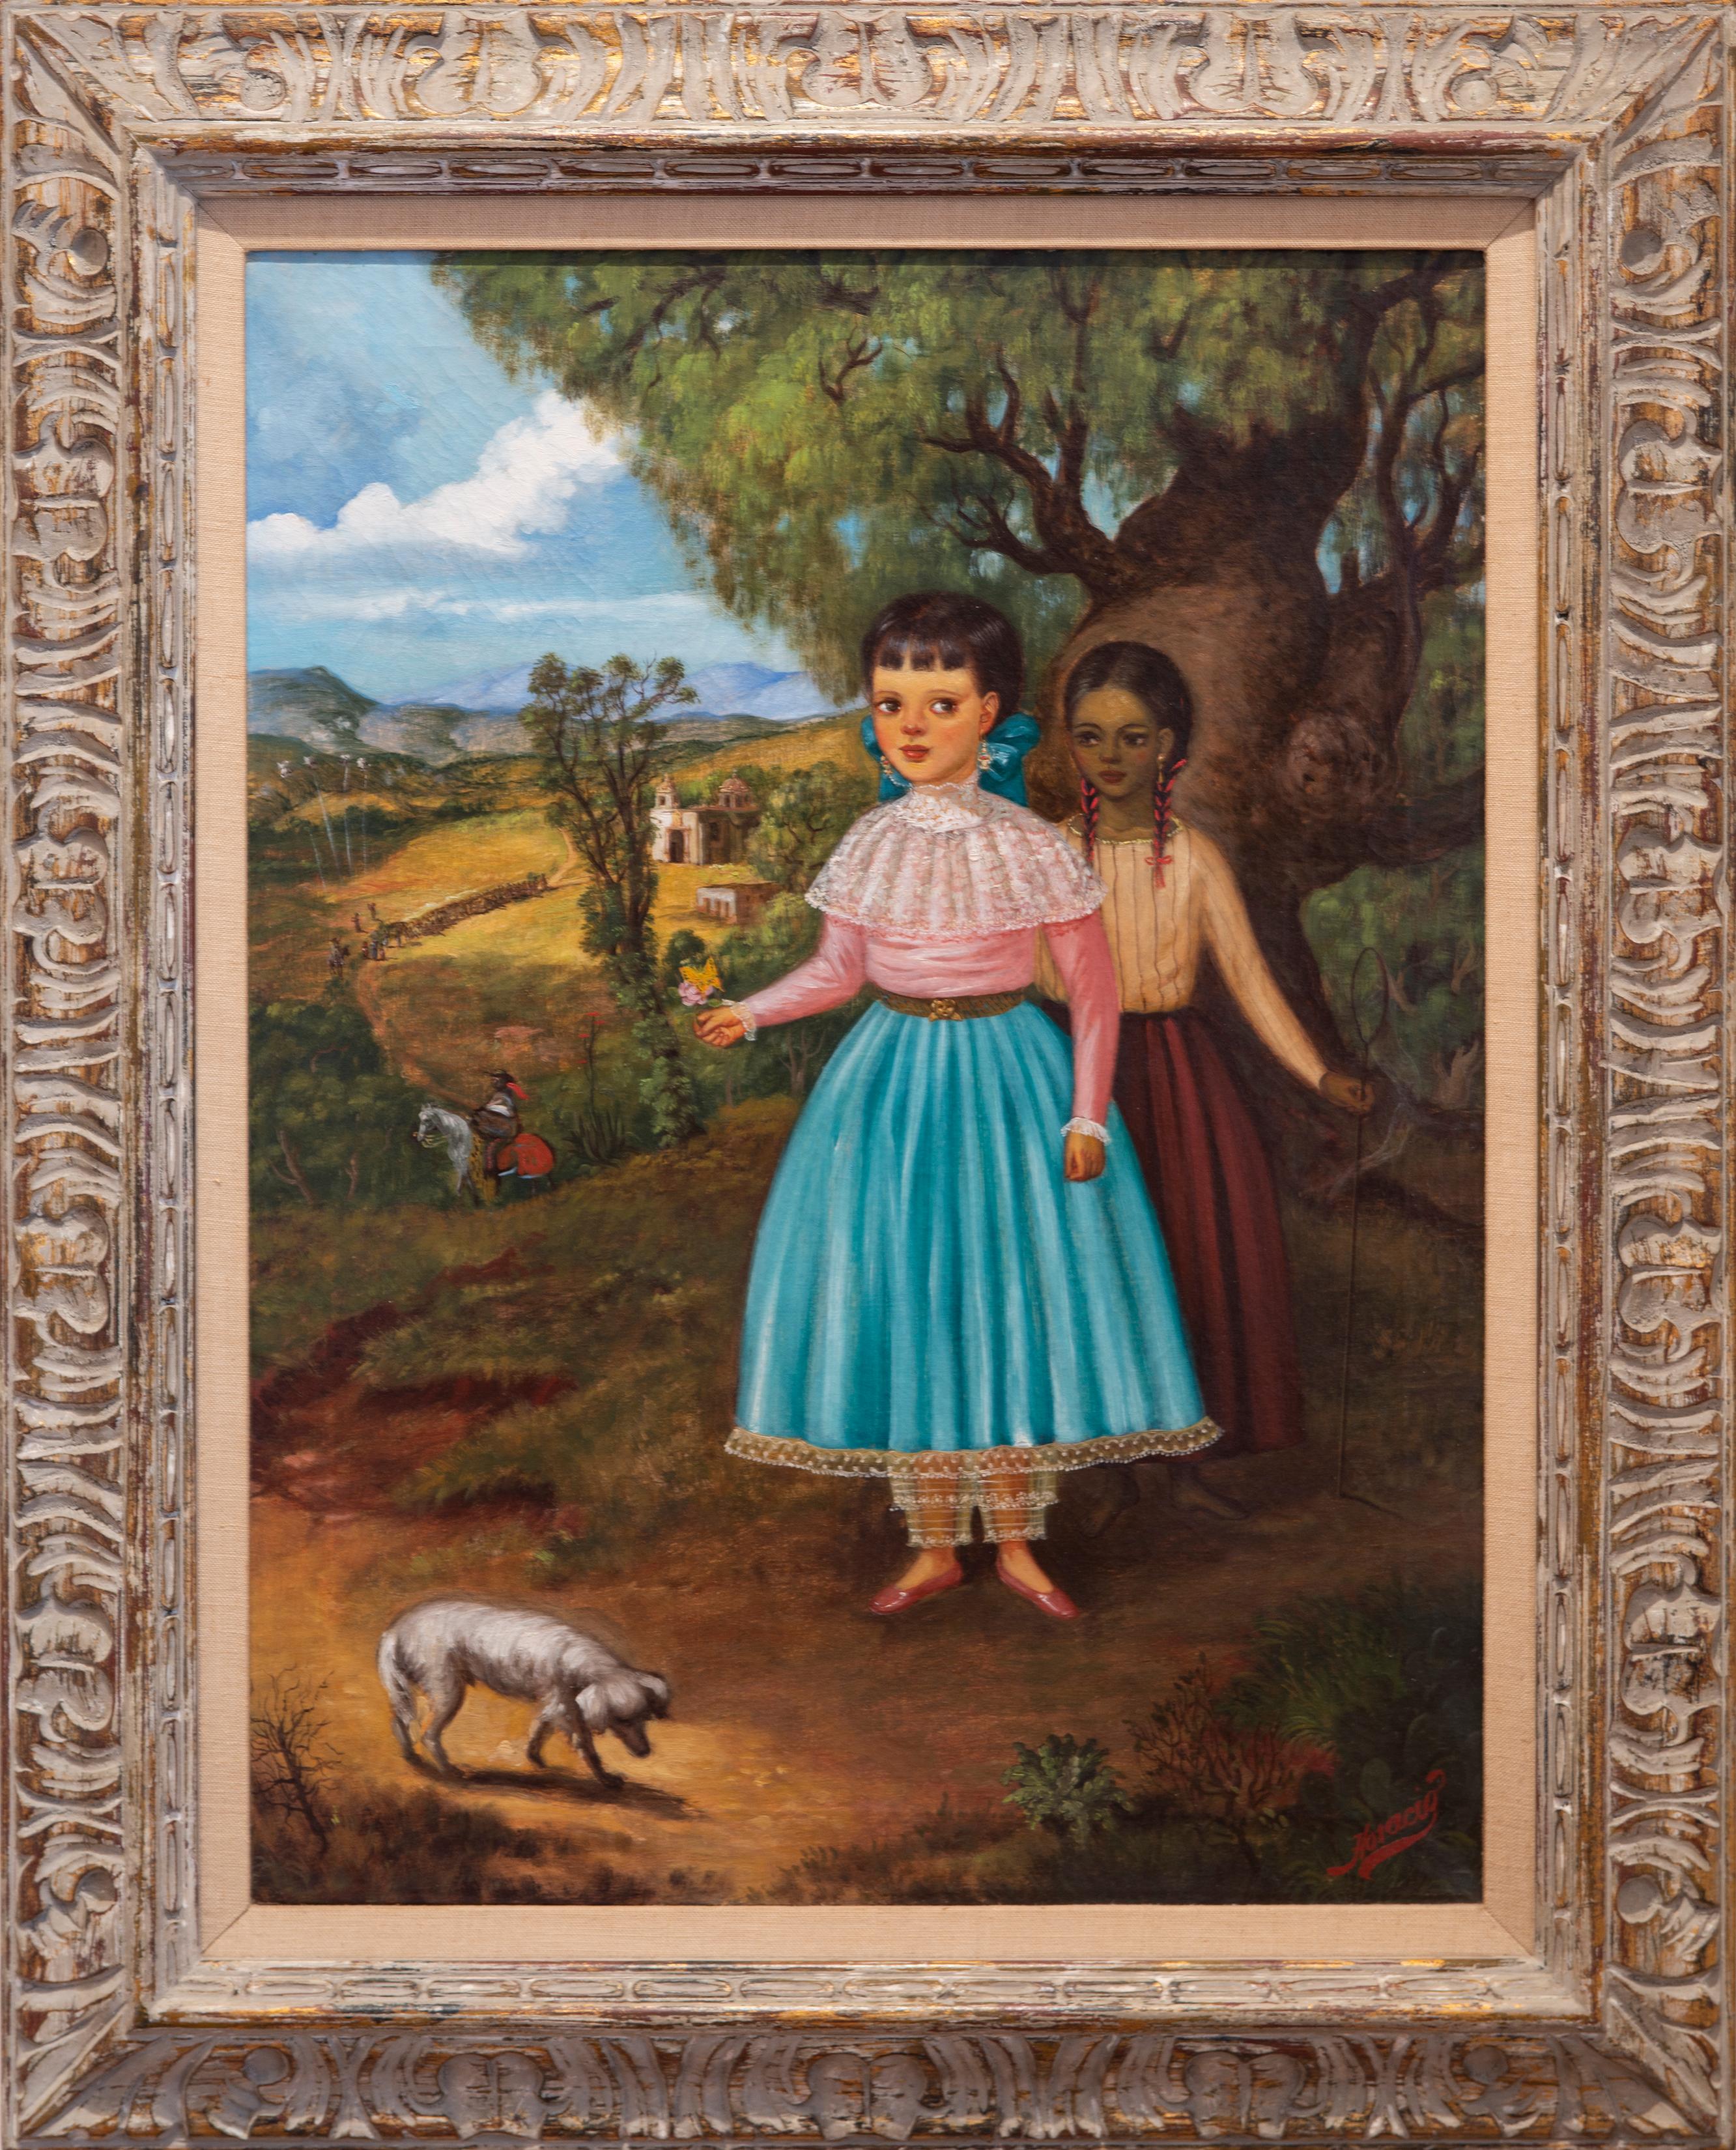 Horacio Rentería Rocha oil paintings are mostly small panels representing idealized and magnificently dressed children. Typically, these are surrounded by beautiful Mexican cultural objects such as for example Piñatas. Pets, especially dogs and